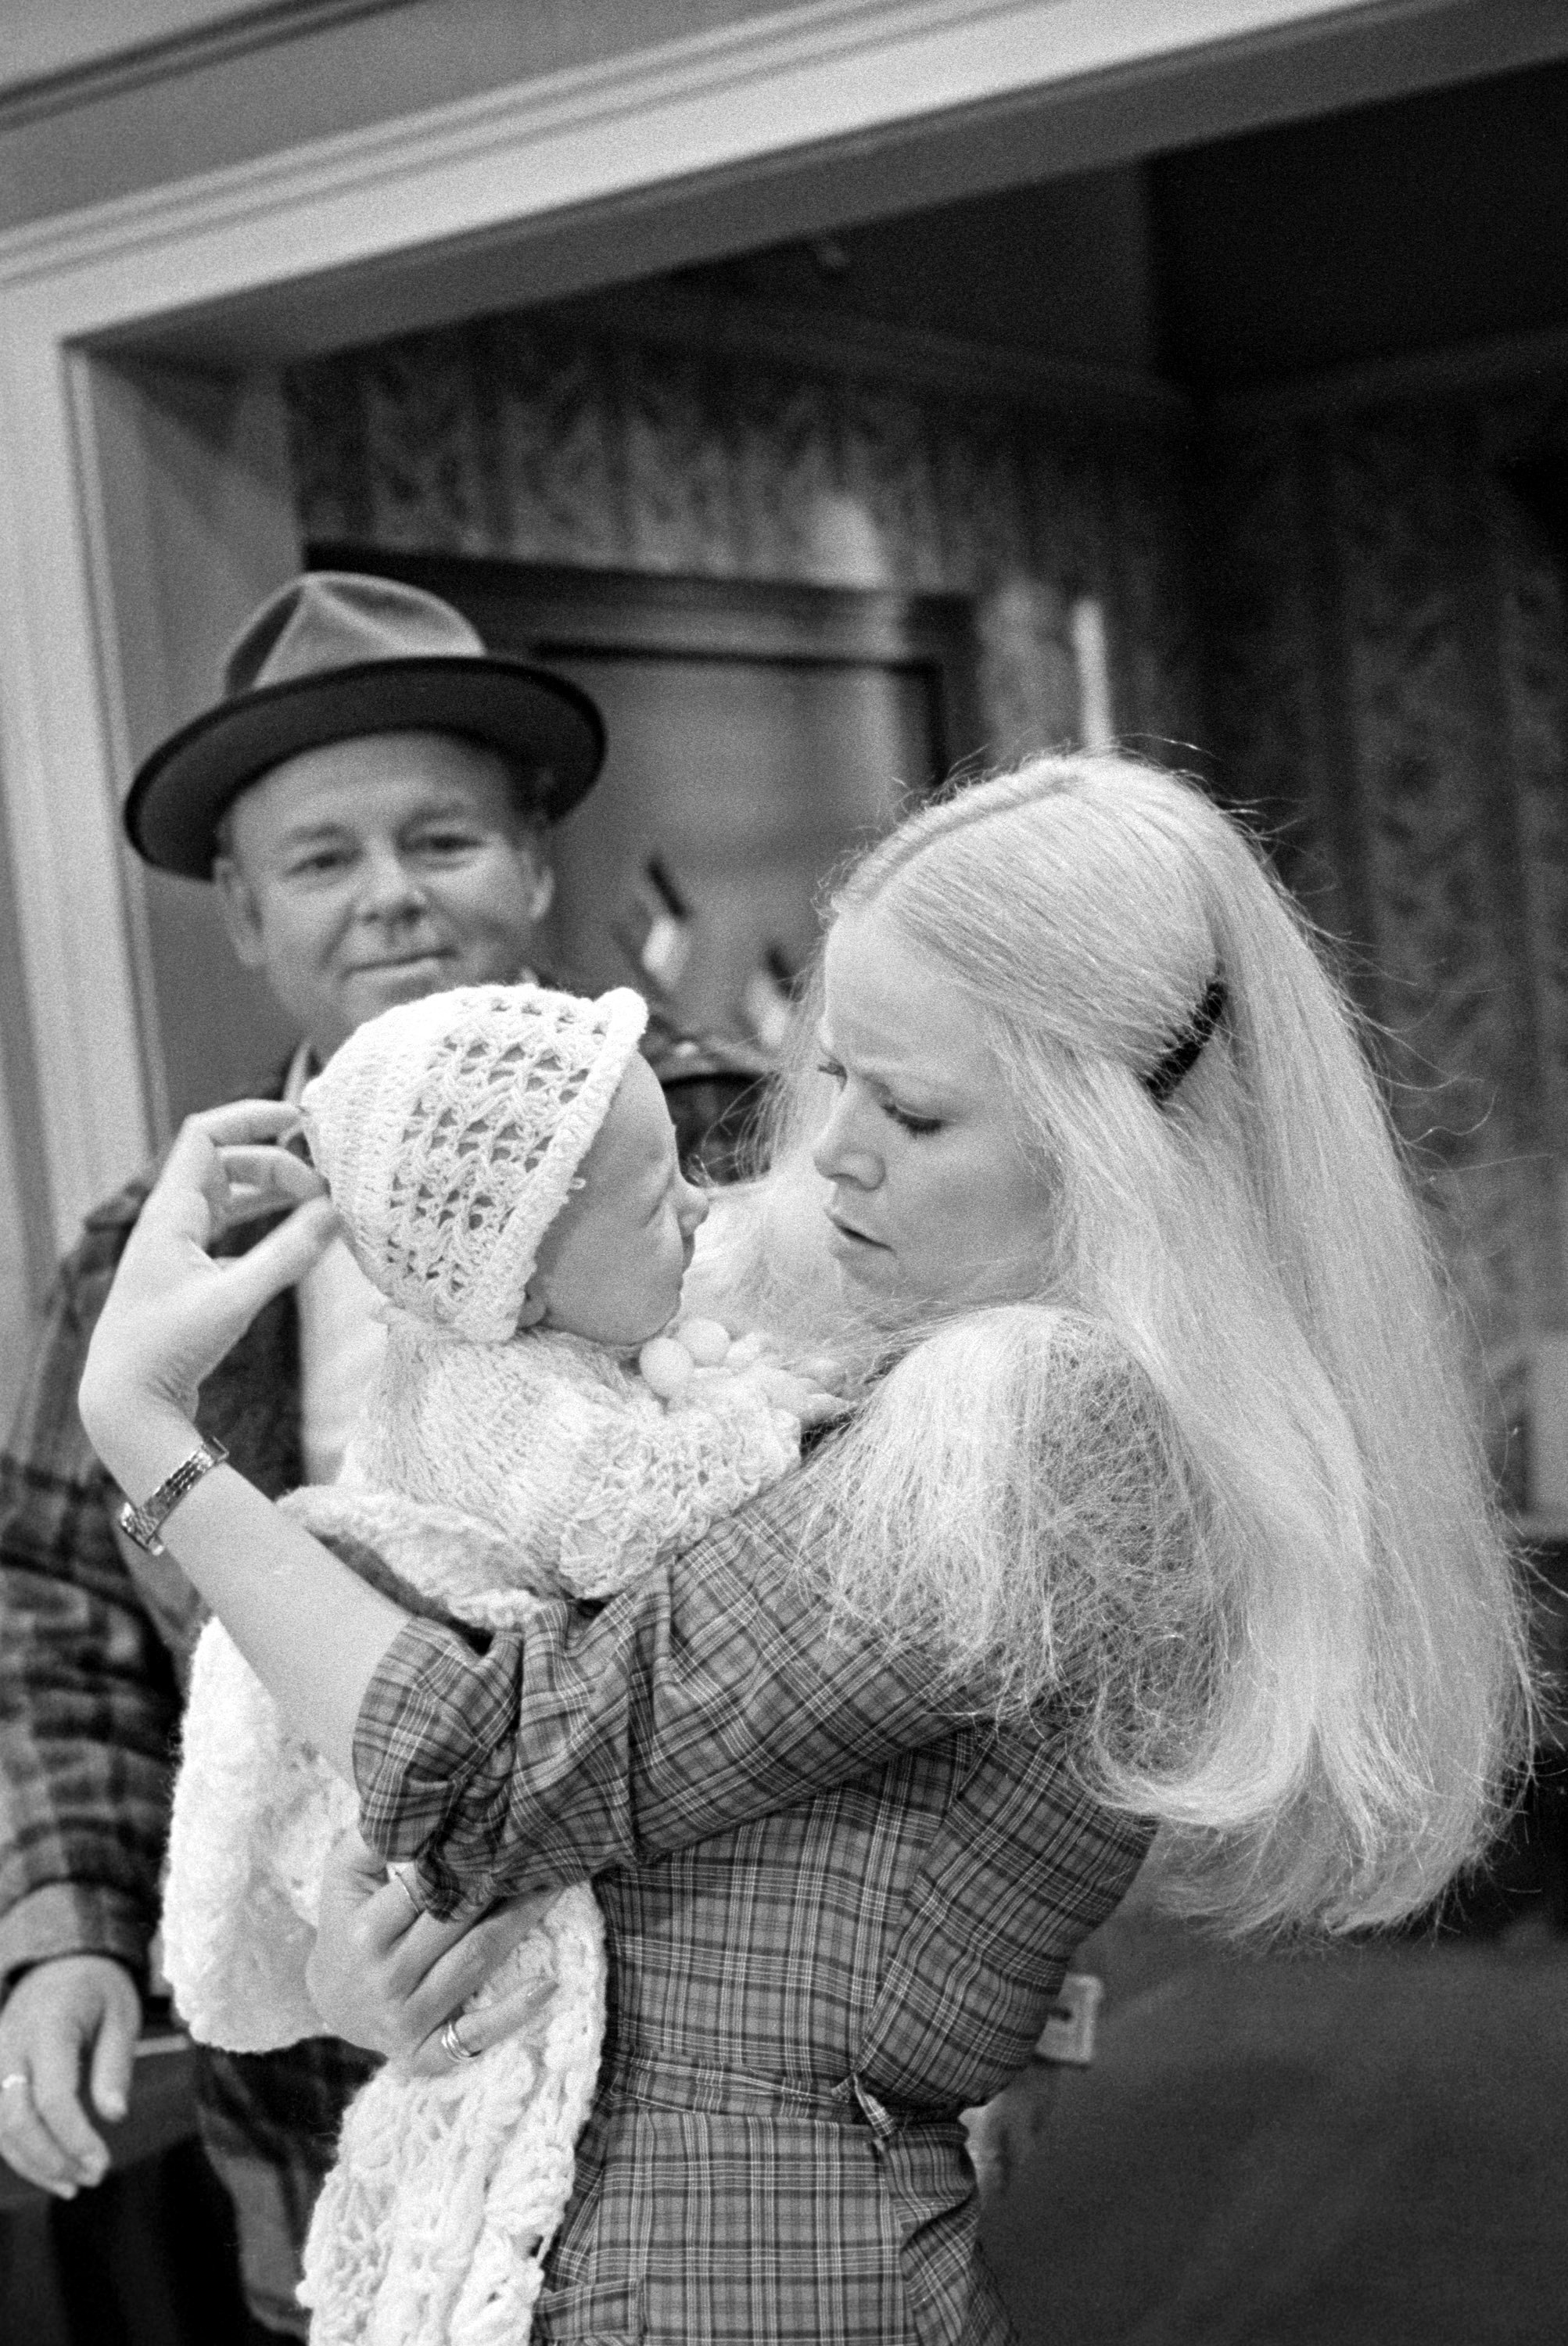 Carroll O'Connor (as Archie Bunker), Sally Struthers (as Gloria Bunker Stivic) and Baby as "Joey Stivic" are shown in the "Mike's move" episode of "All in family on January 16, 1976. |  Source: Getty Images